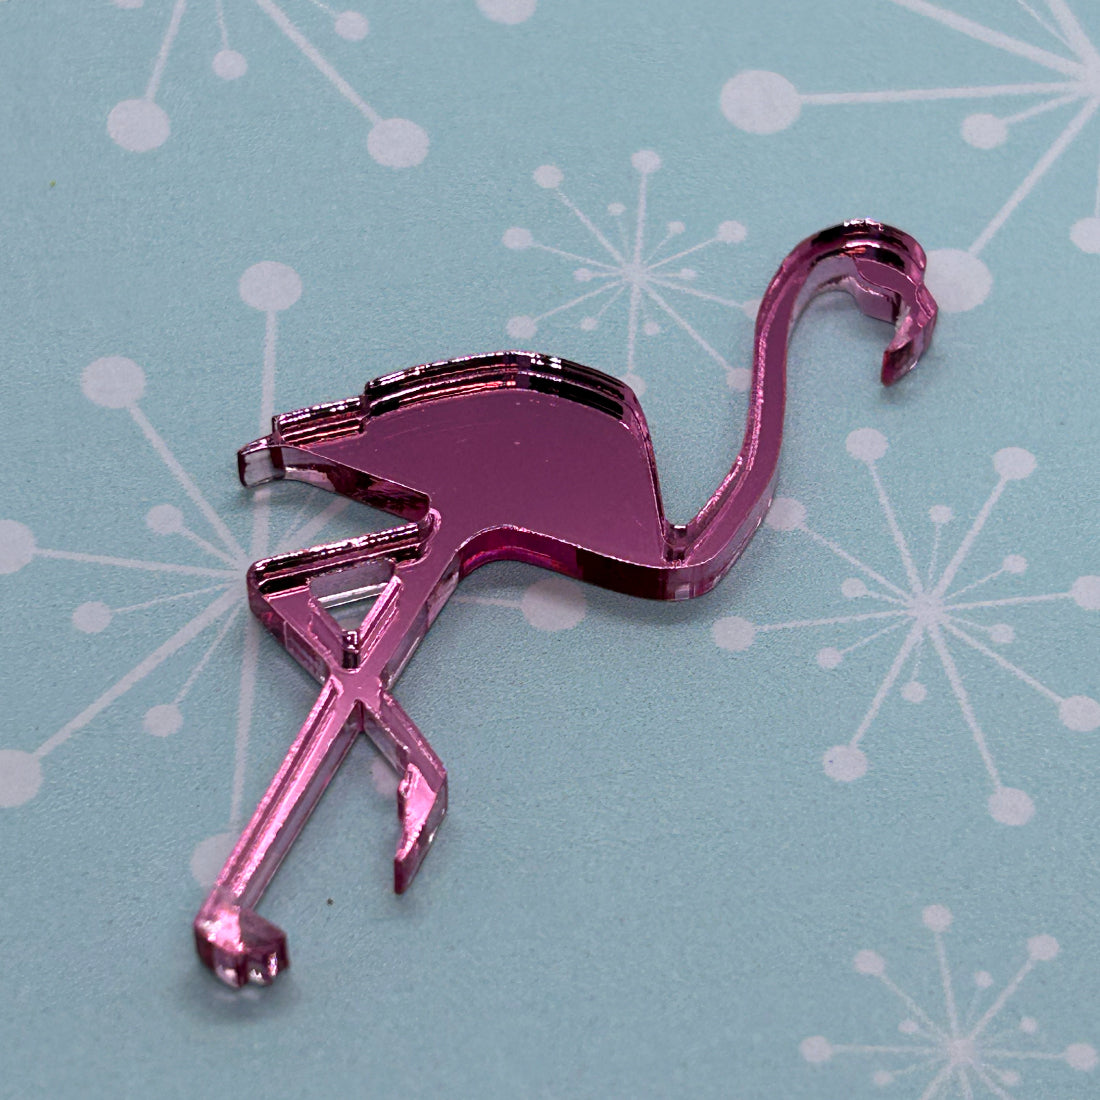 Acrylic Flamingo brooches, necklaces and earrings - The Argentum Design Co